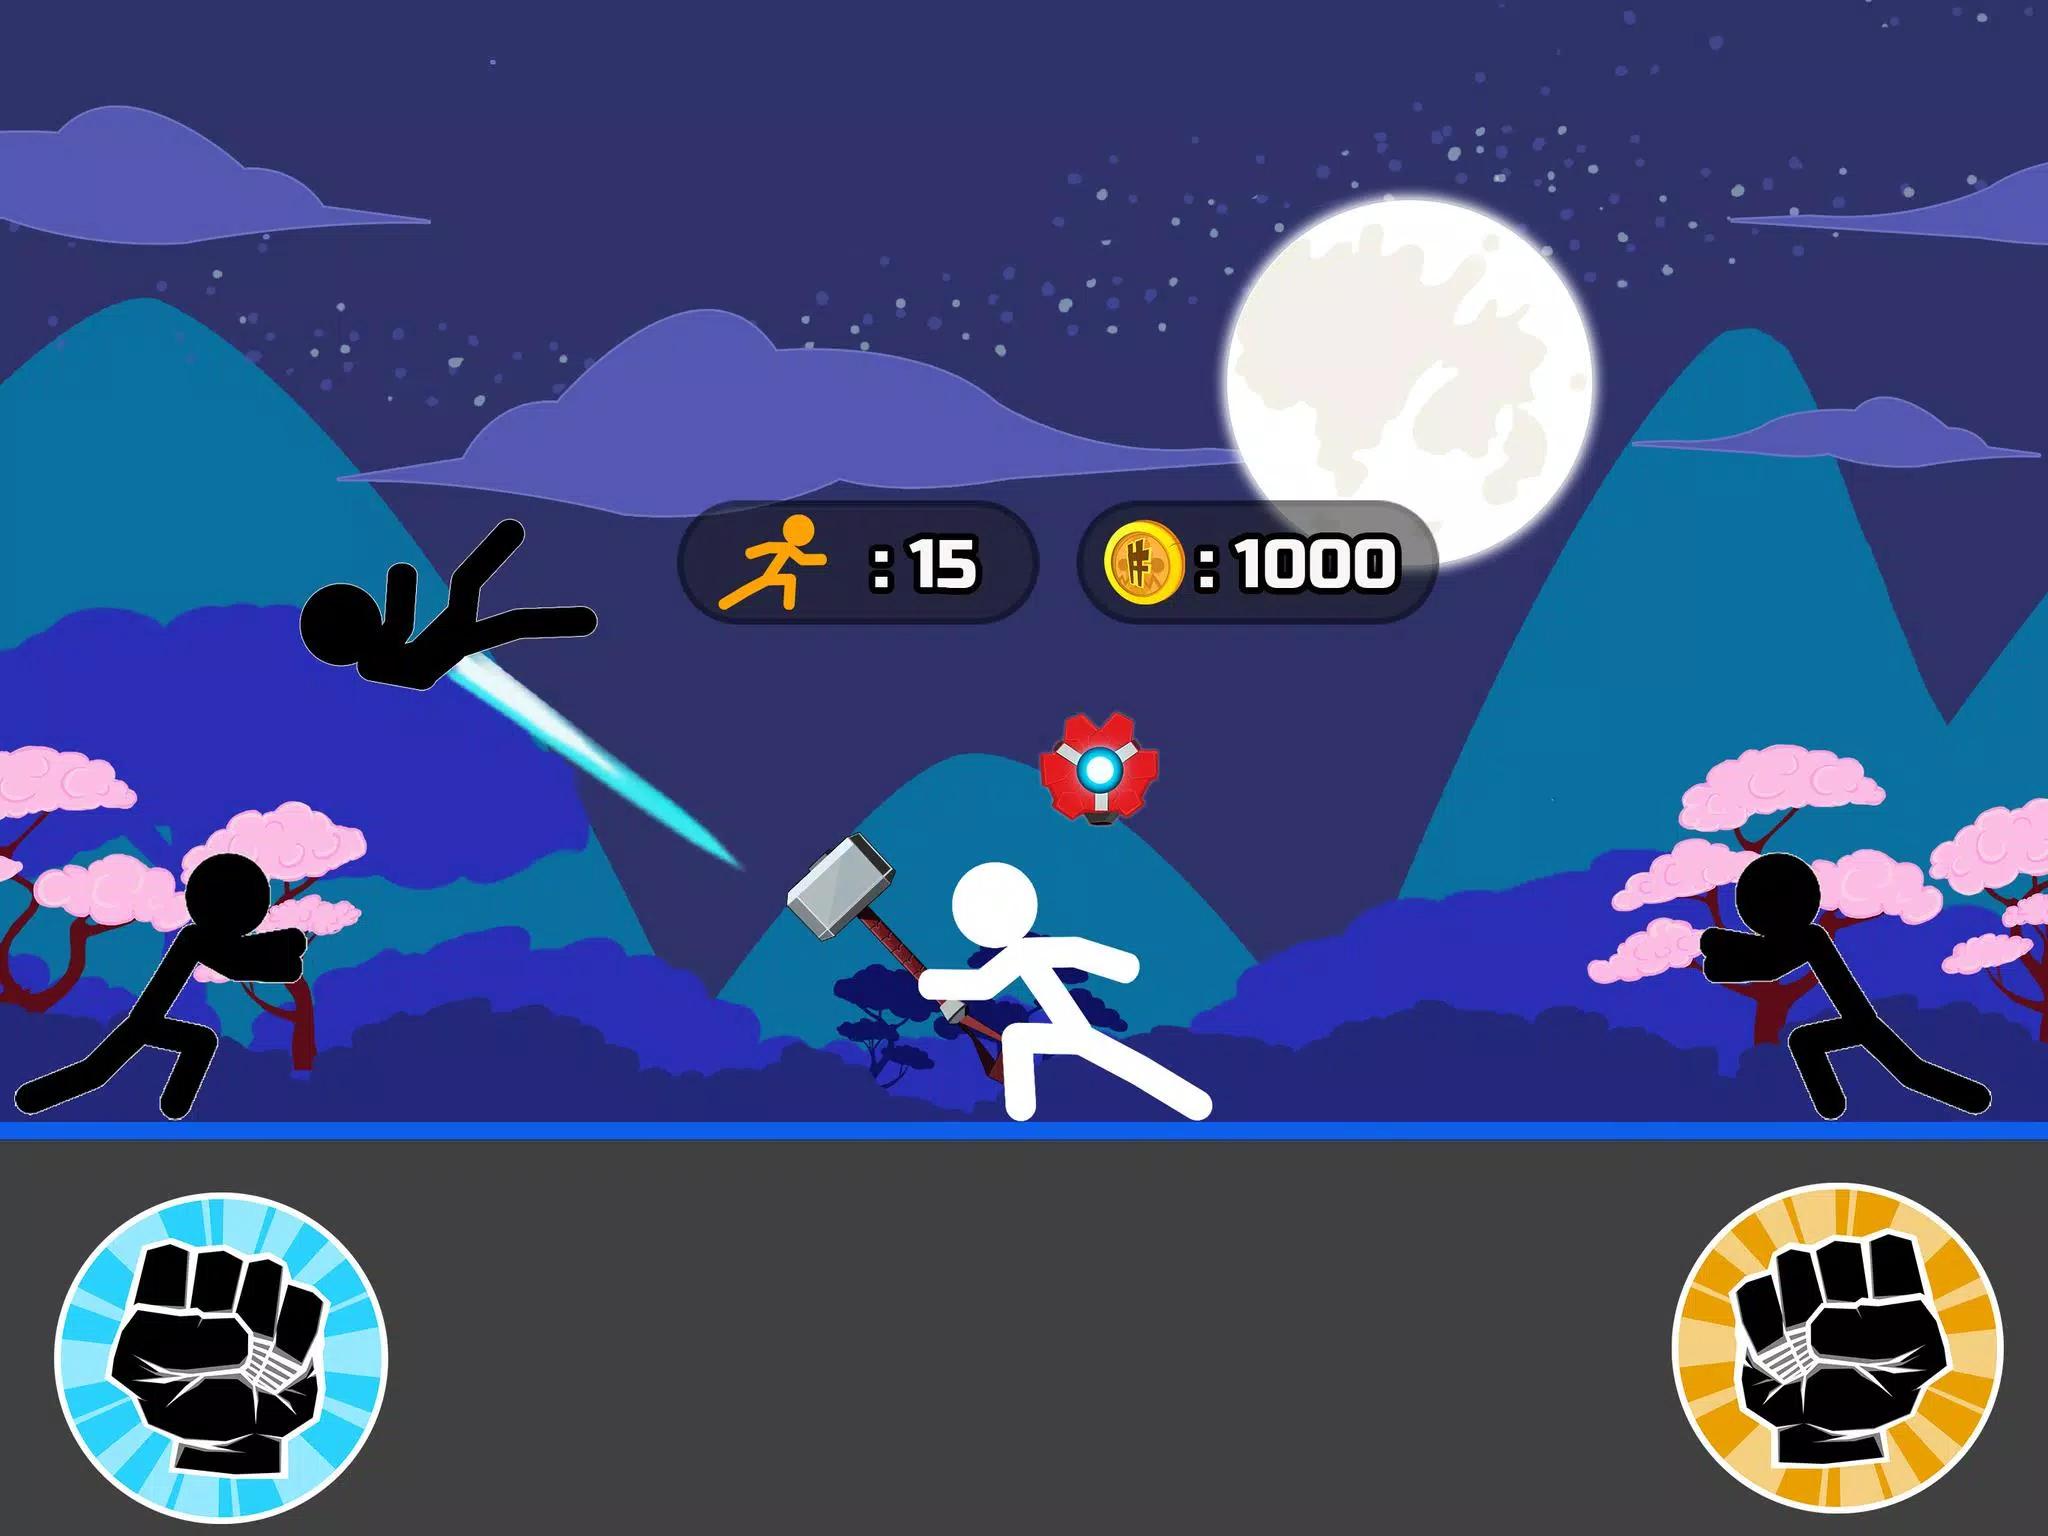 Stickman Epic Fight for Android - Free App Download